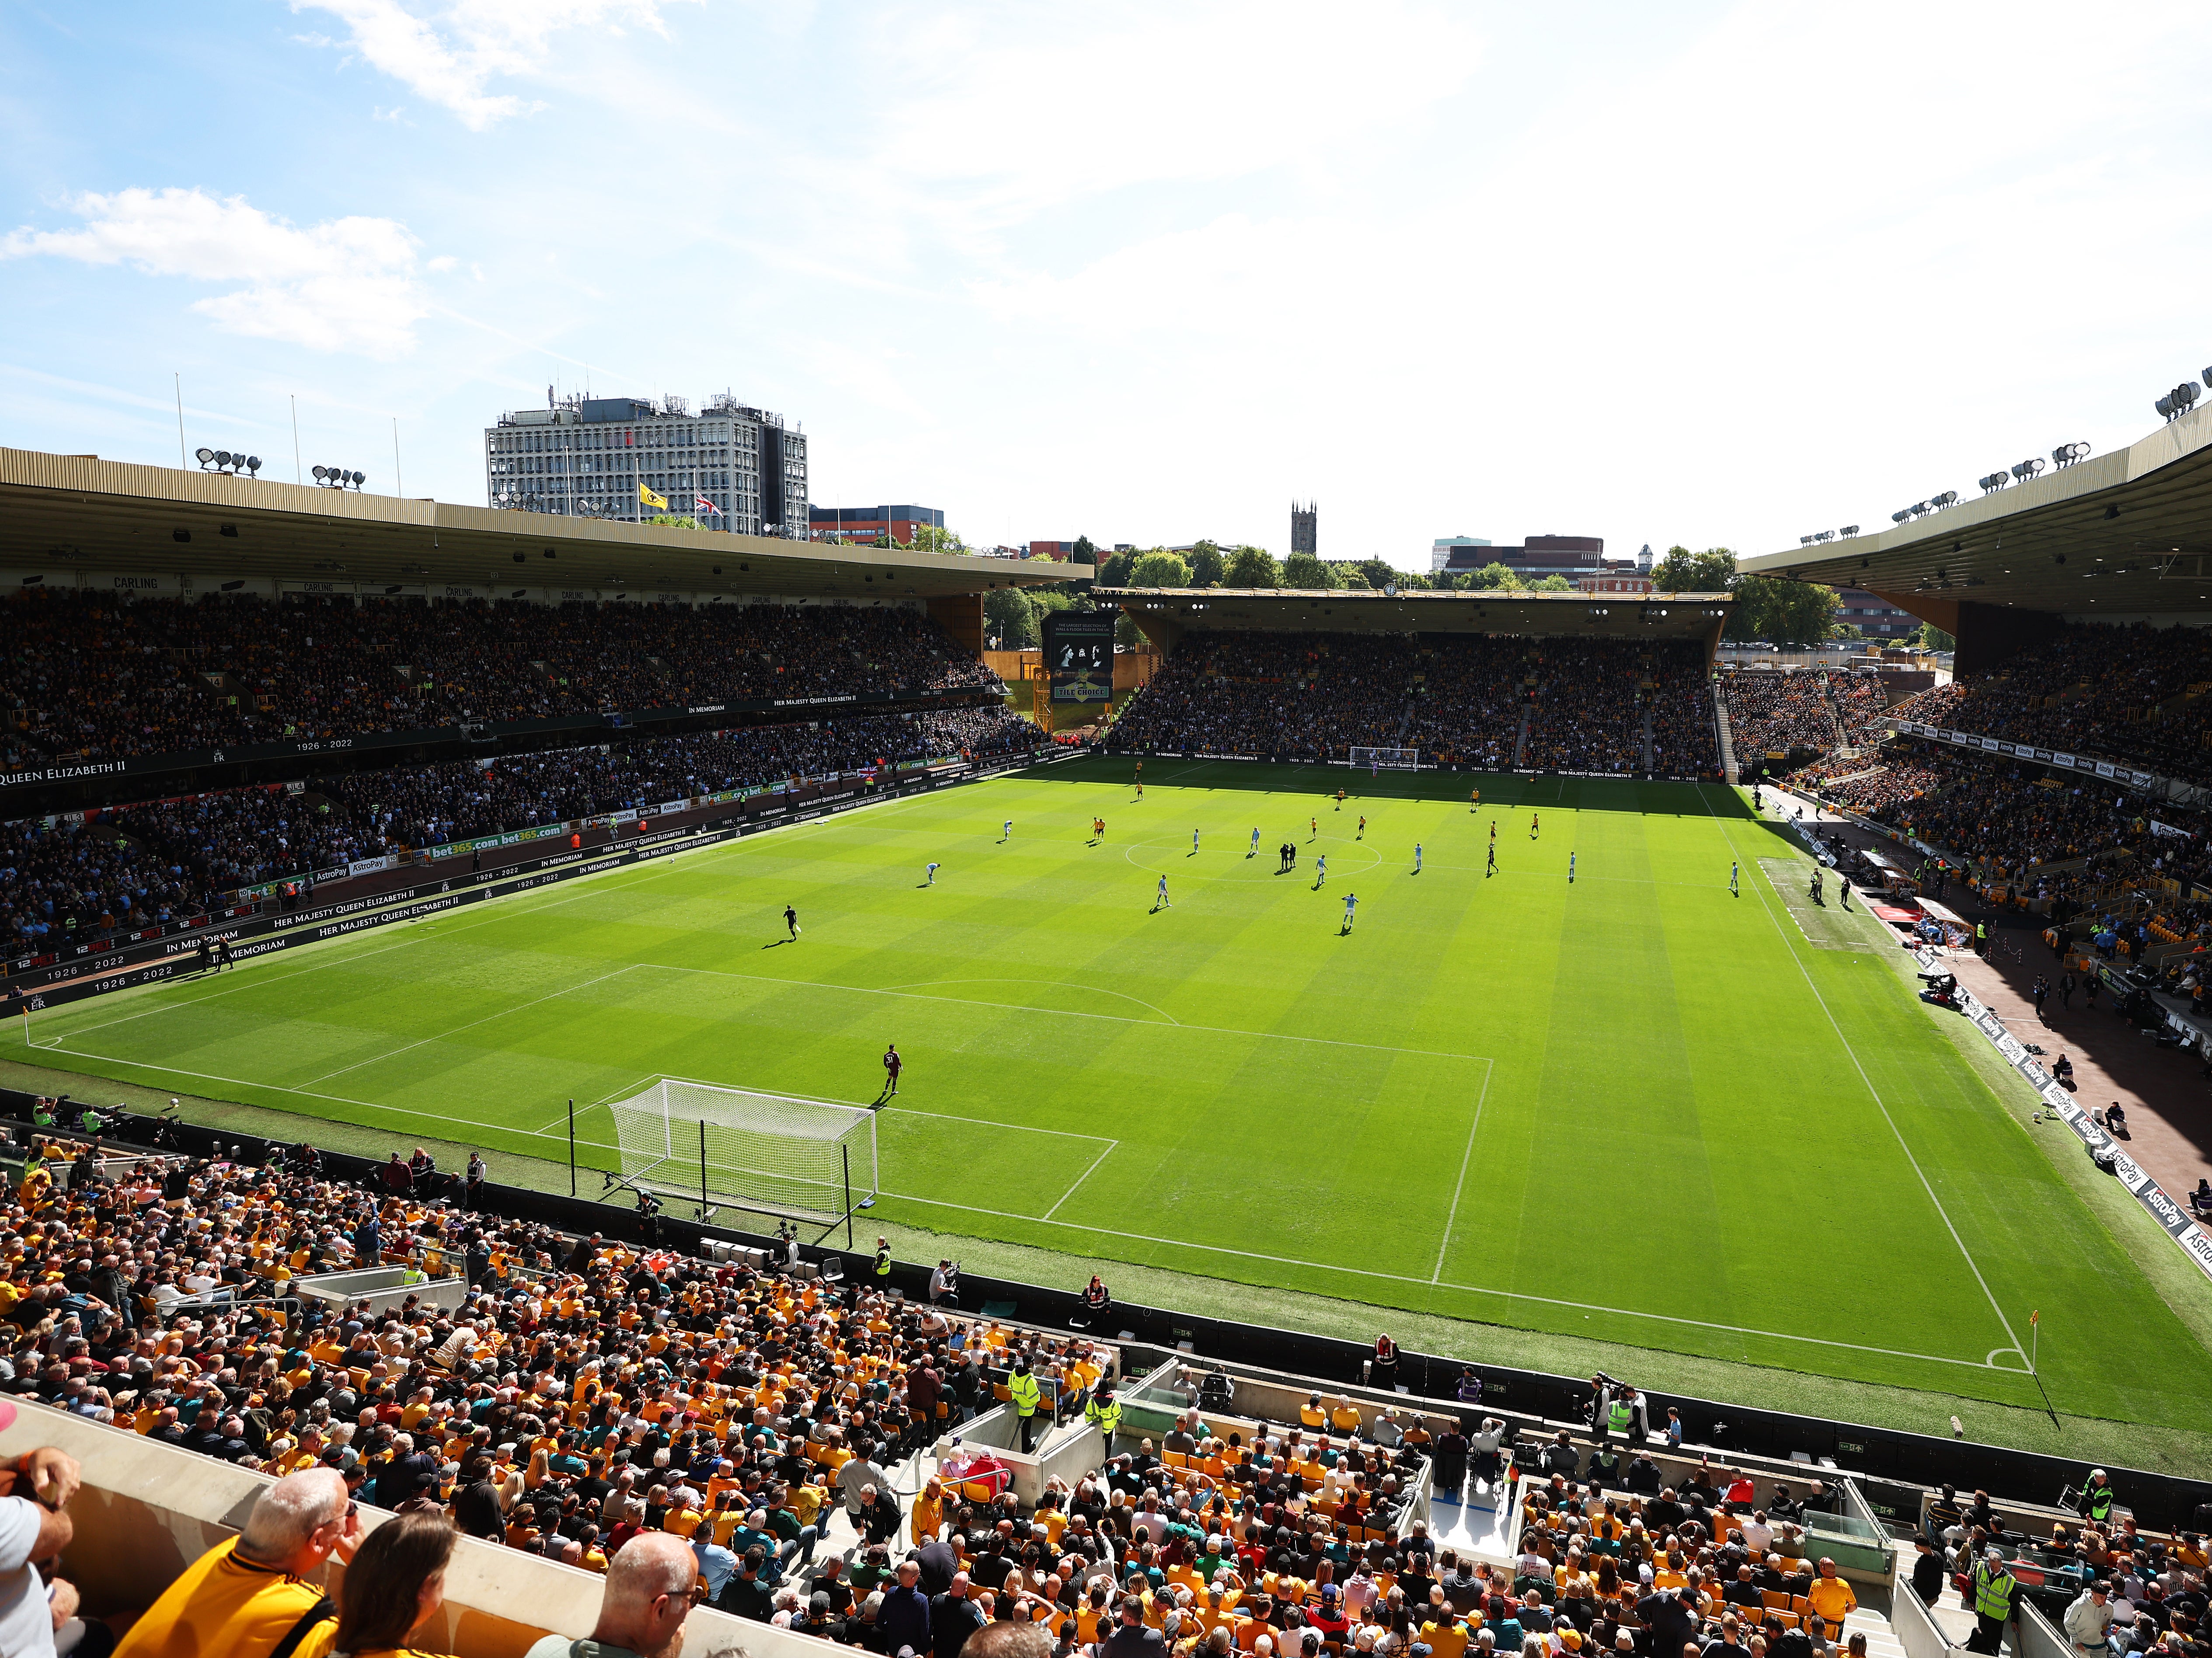 Molineux Stadium, the home of Wolverhampton Wanderers